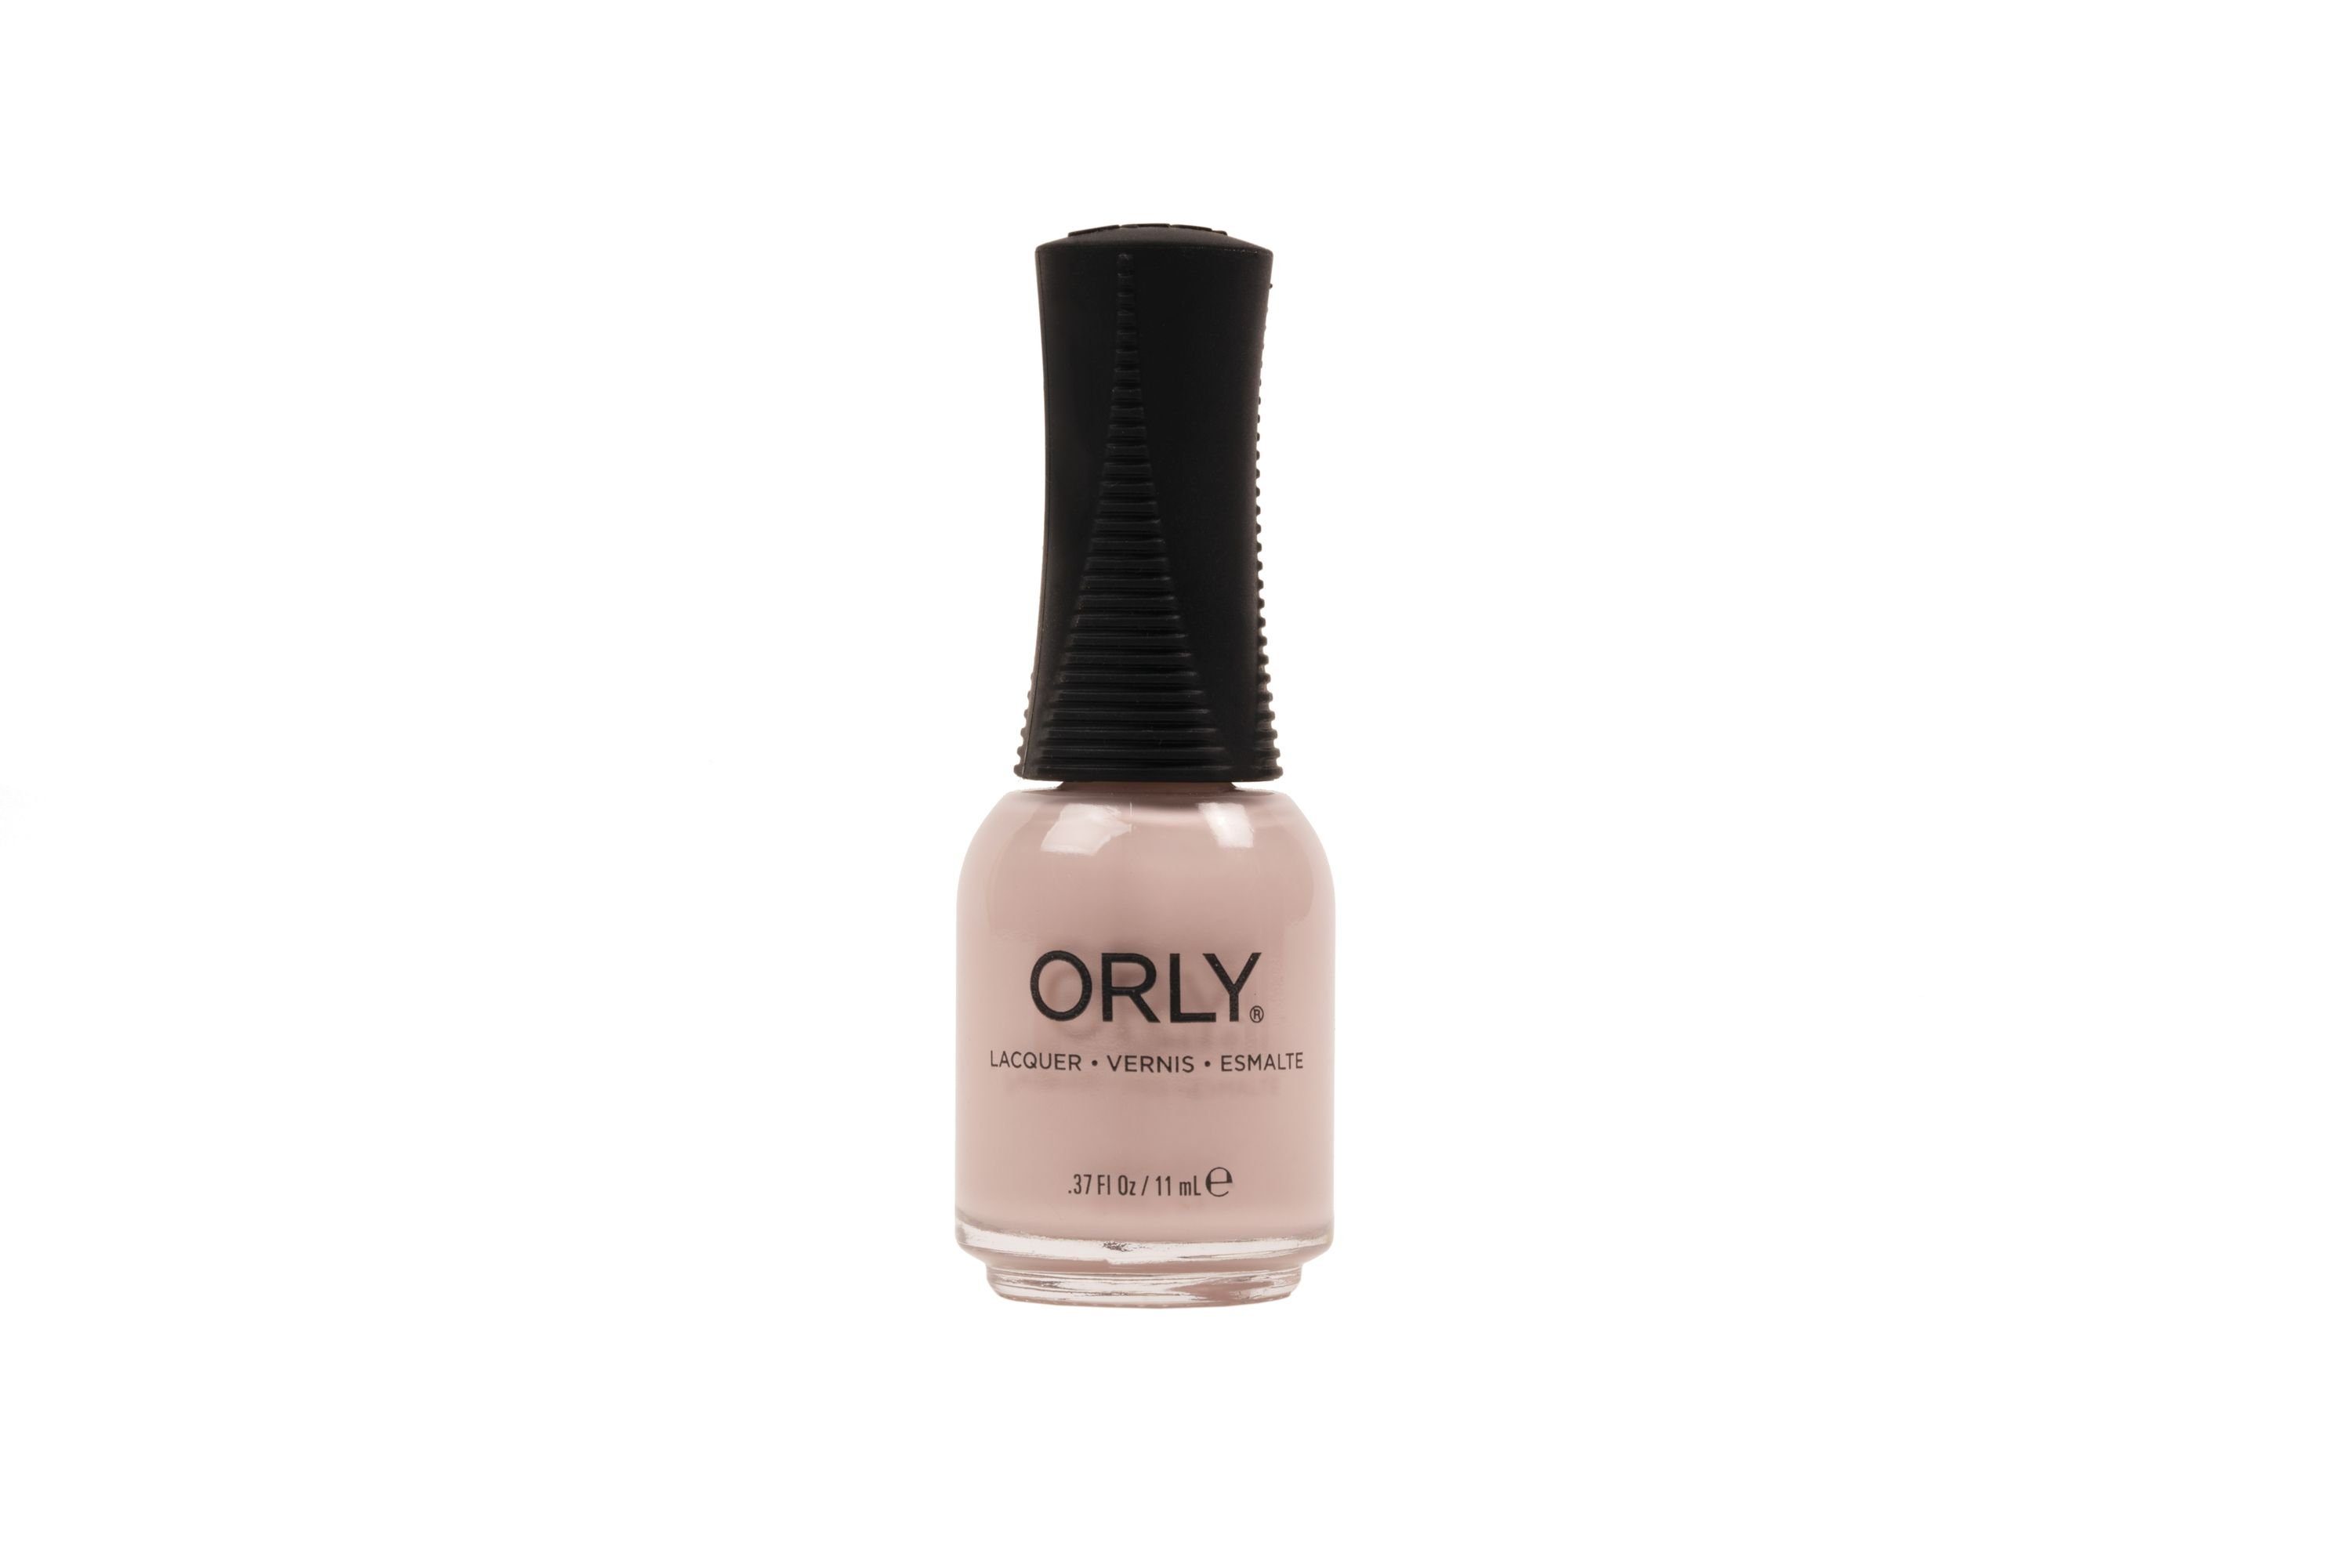 ORLY Nagellack ORLY KISS THE BRIDE, 11 ml